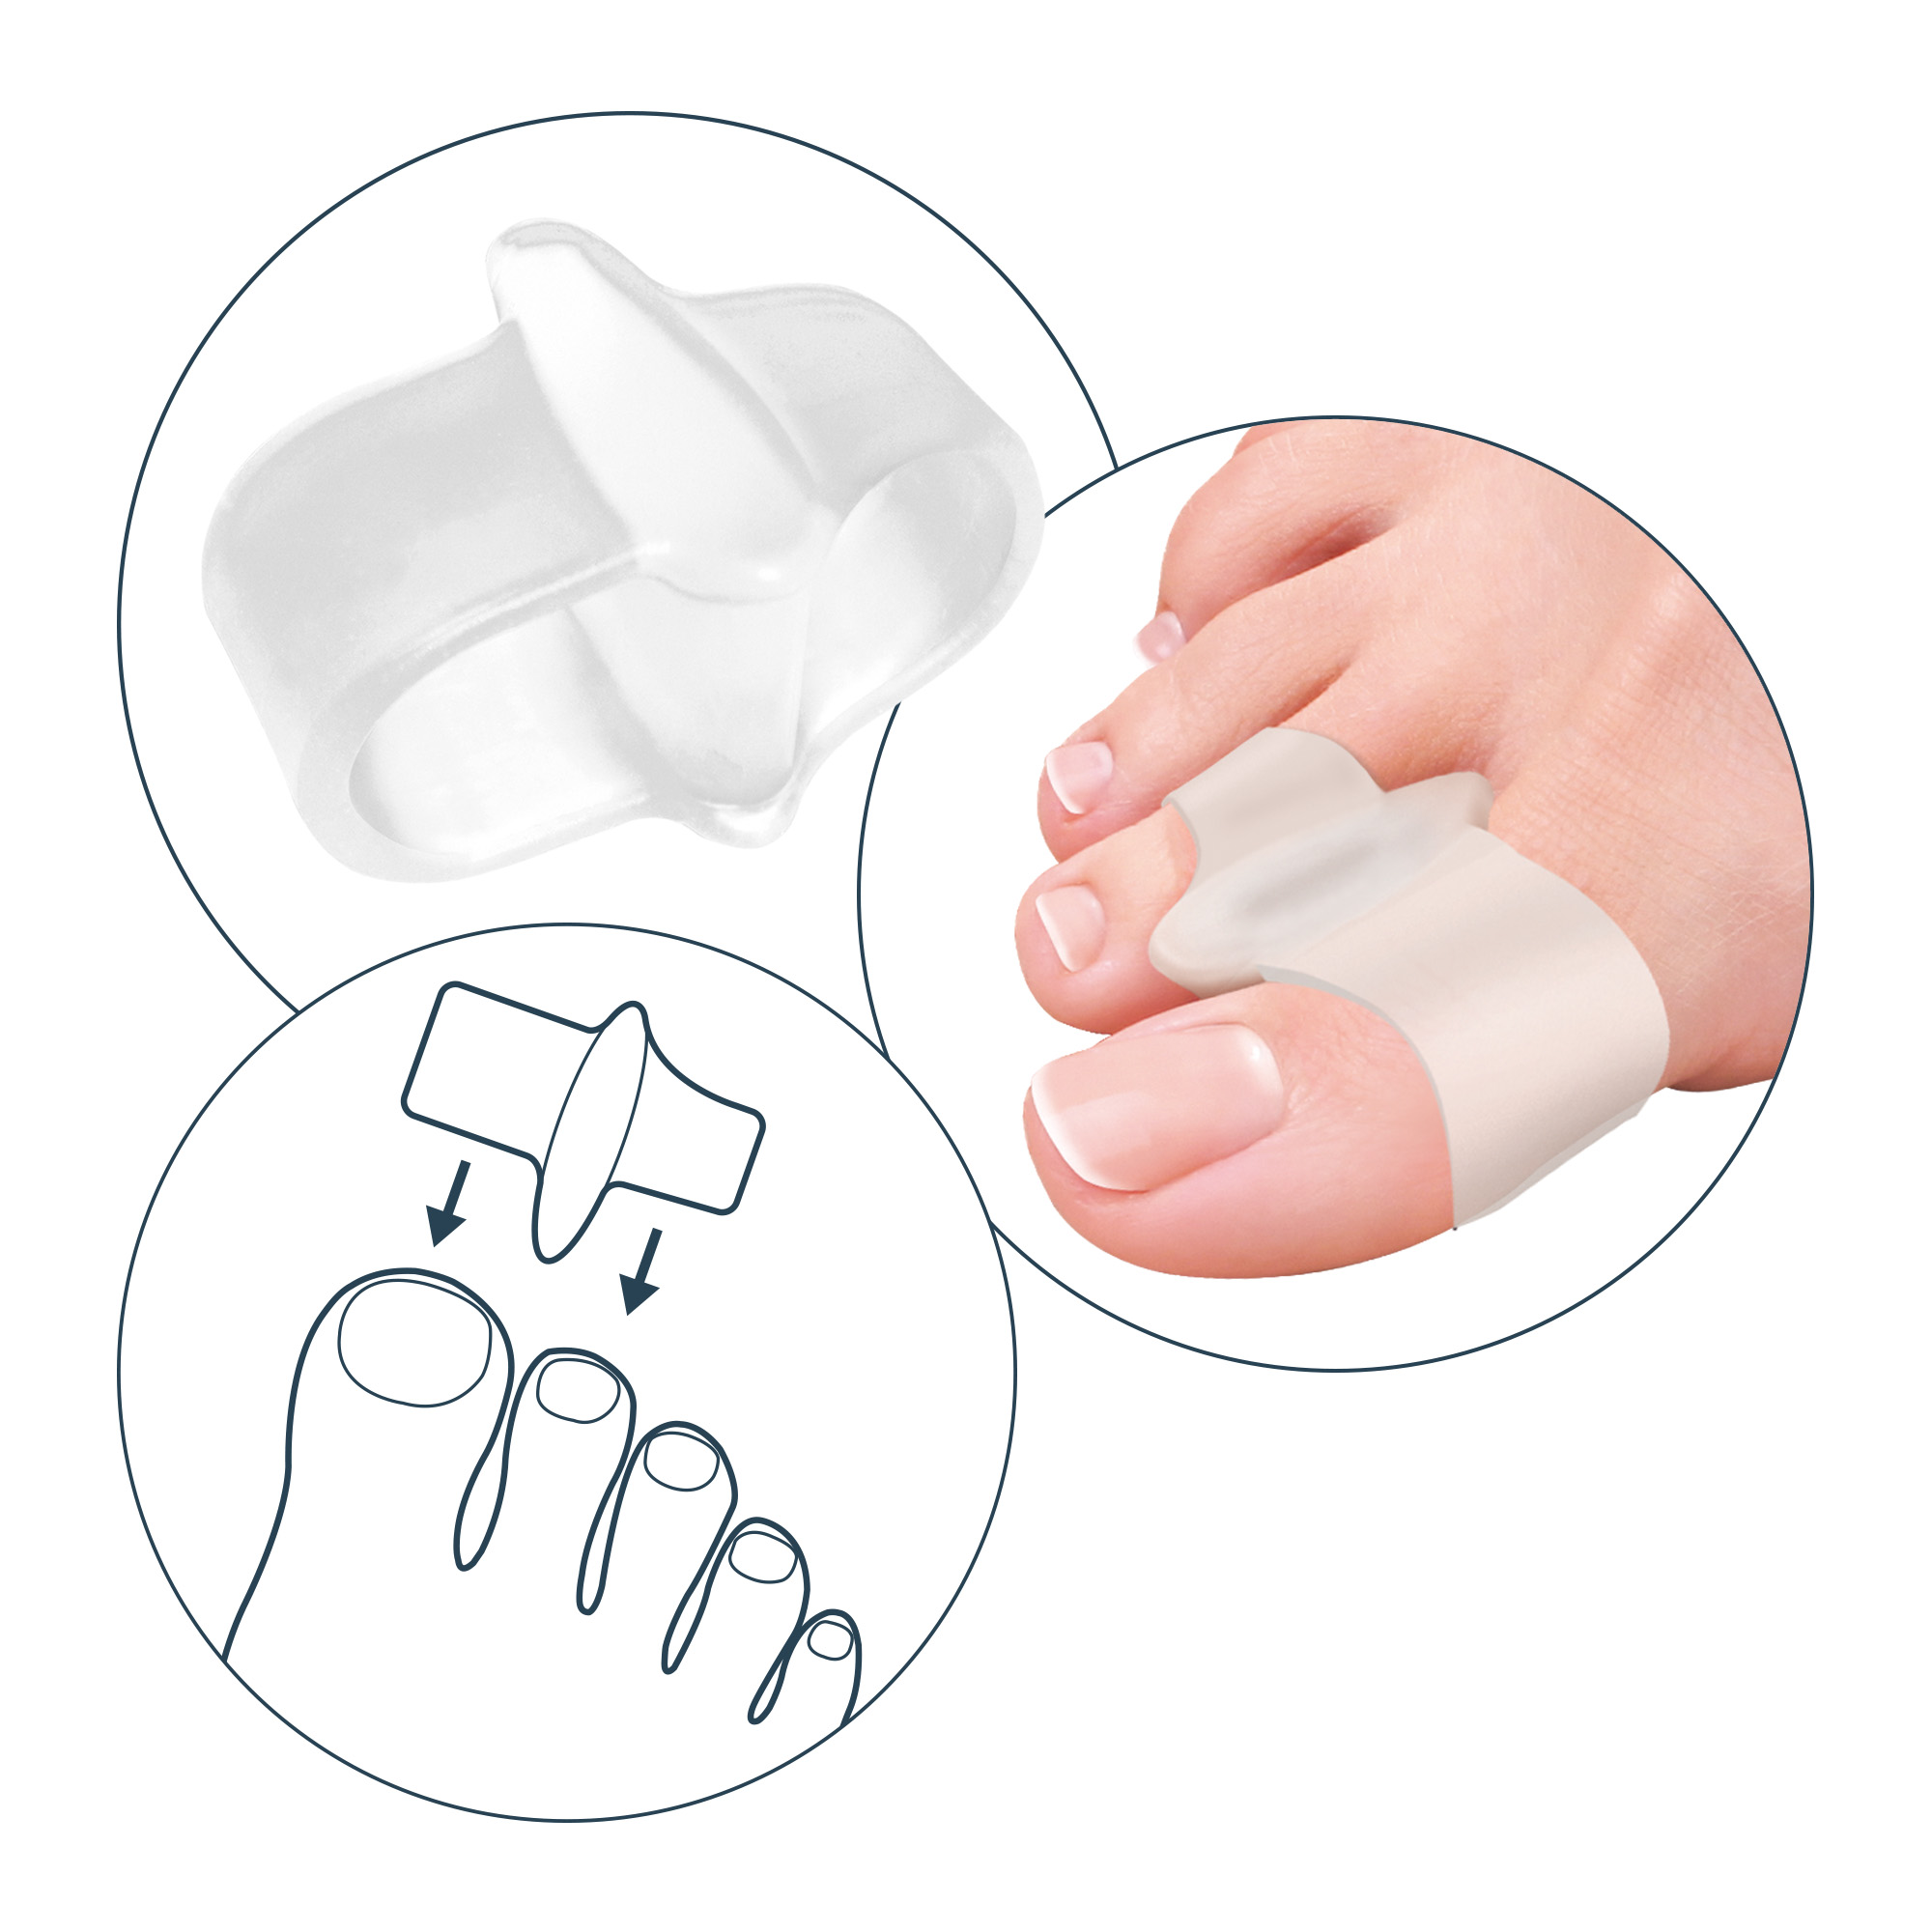 Alluxcare double ring gel toe separator and spreader 6-box display